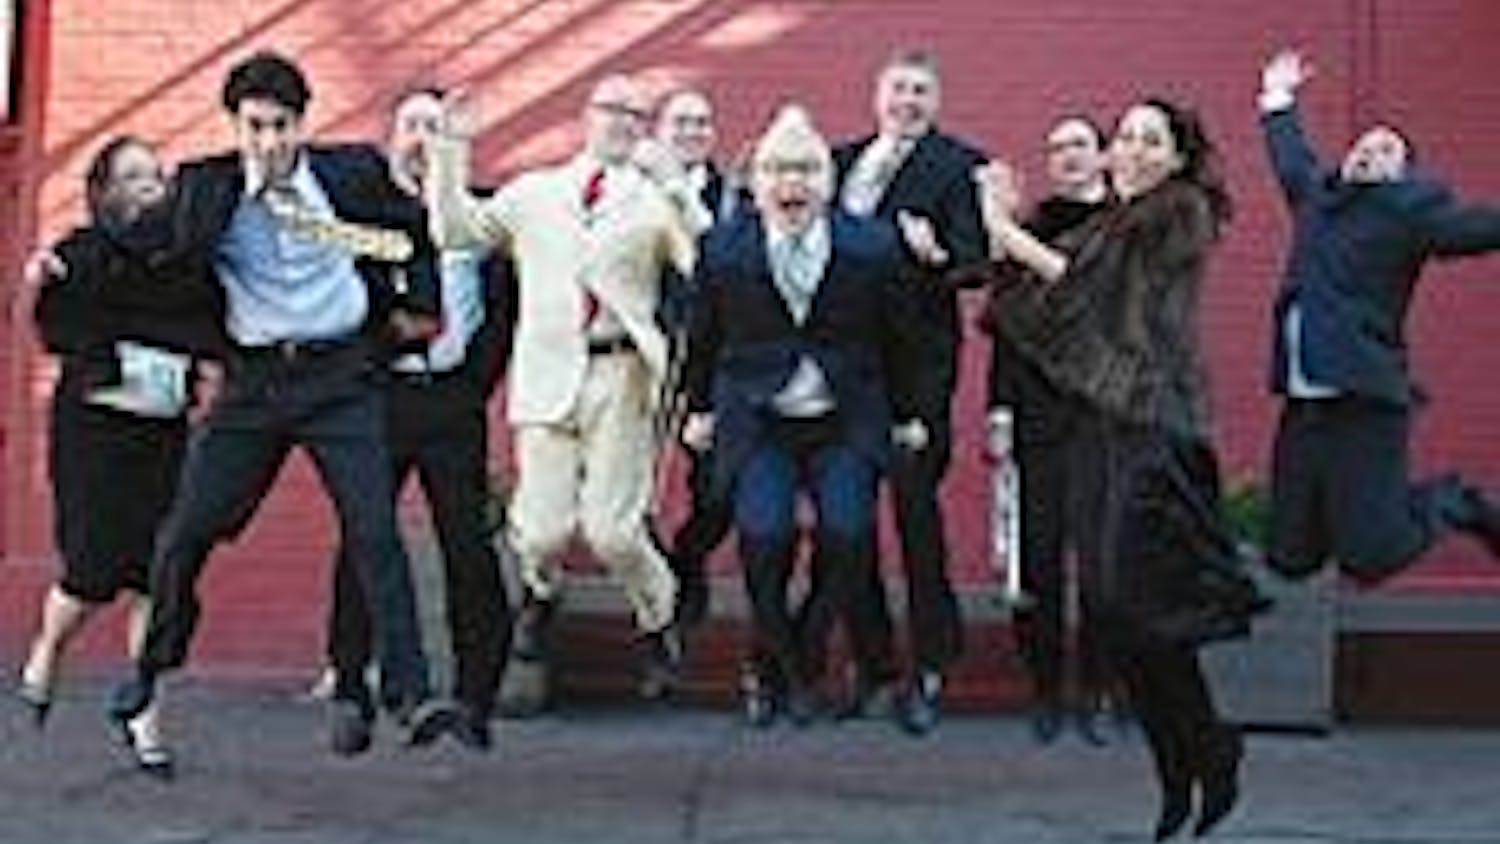 Pink Martini's exuberant sound is matched only by their large numbers, high fashion and success on Parisian pop charts.